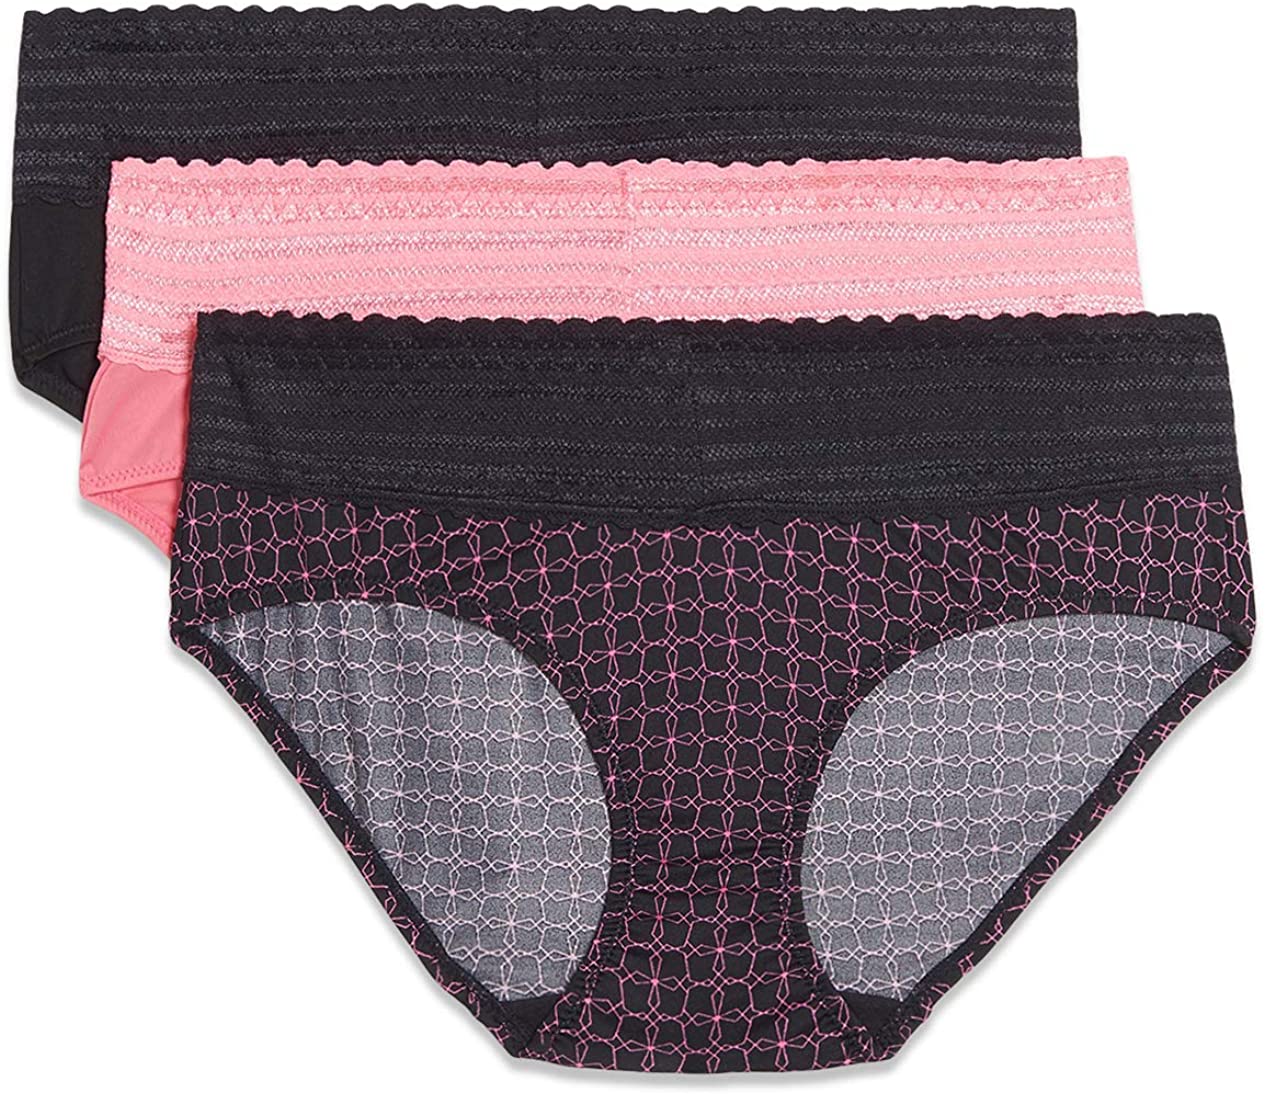 WOMENS PANTY WARNERS No Muffin Top Blissful Benefits Hipster Lace